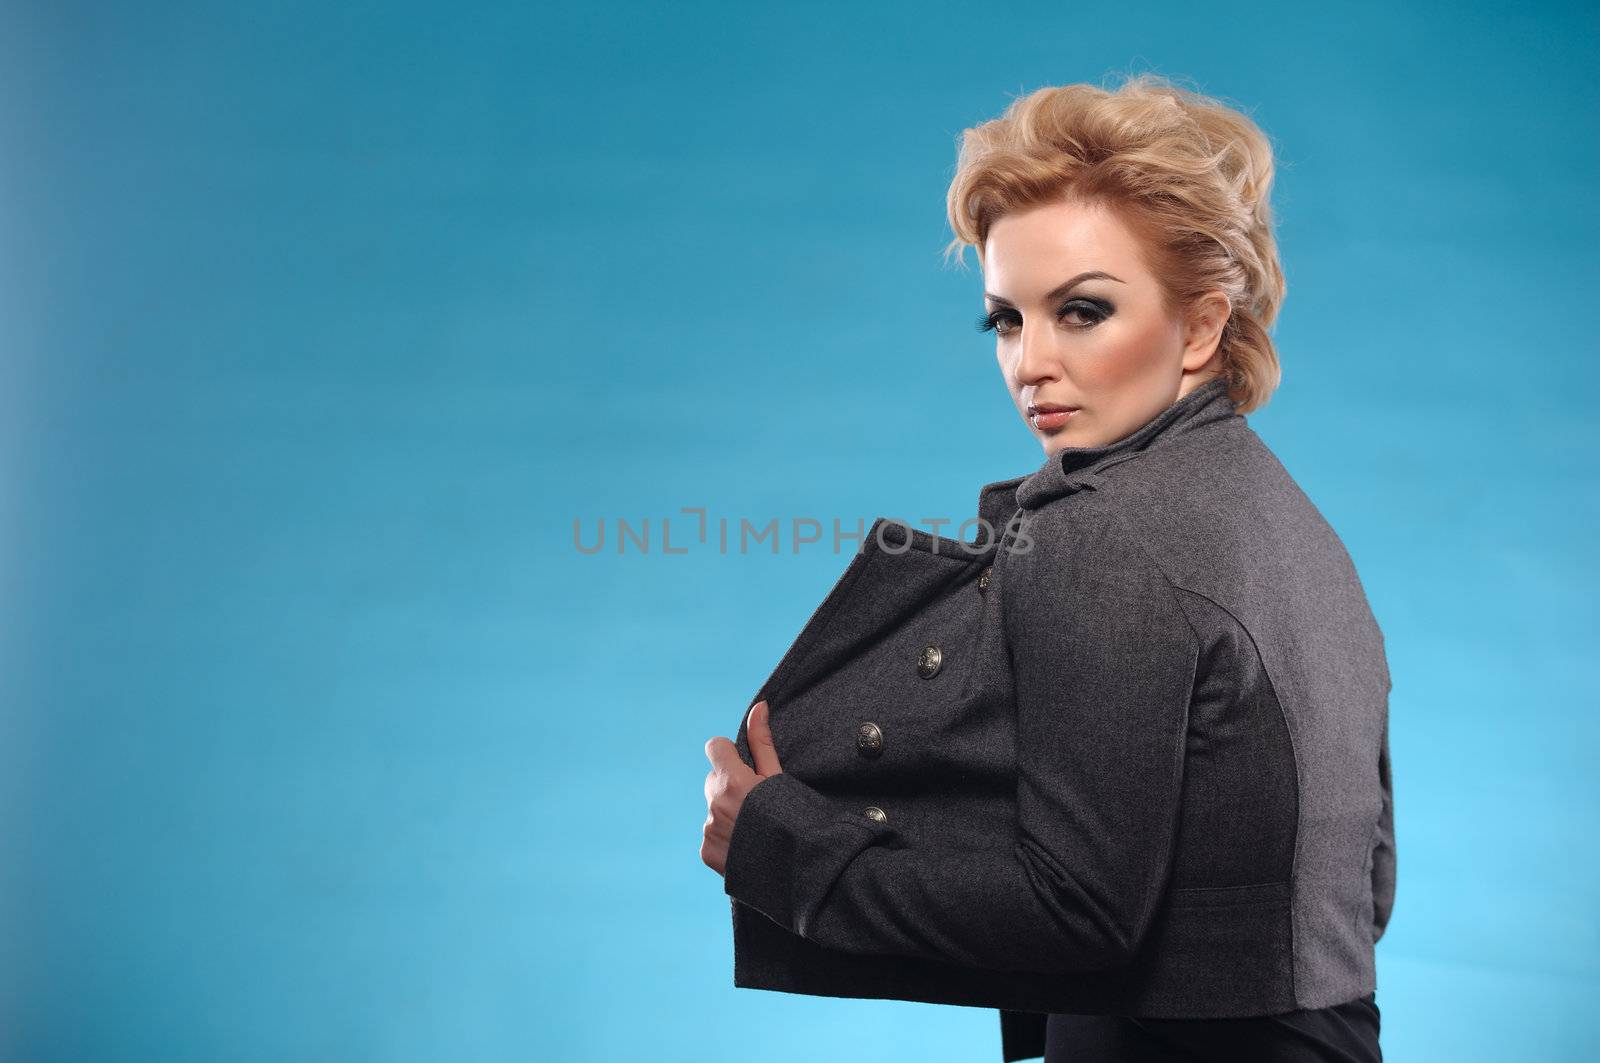 Portrait of beautiful blond femme fatale with shirt hair in gray jacket and black dress posing on blue background